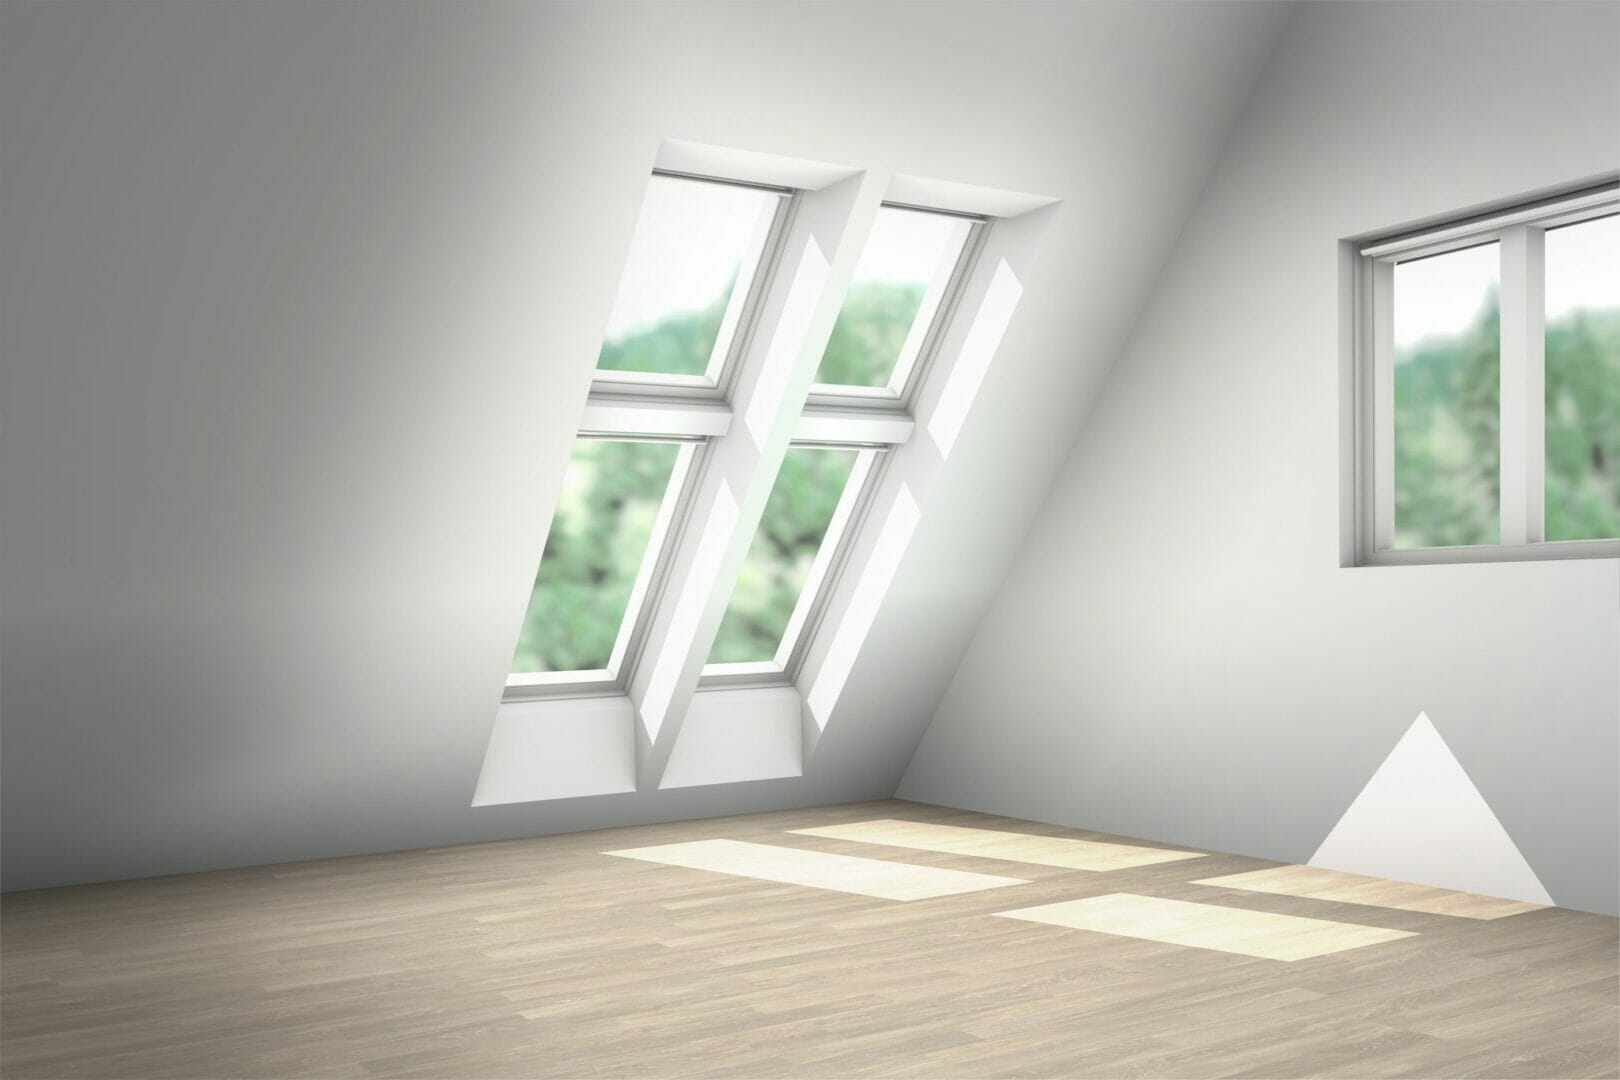 VELUX® launches MyDaylight – the world’s first virtual reality app for renovation design @VELUXGBI